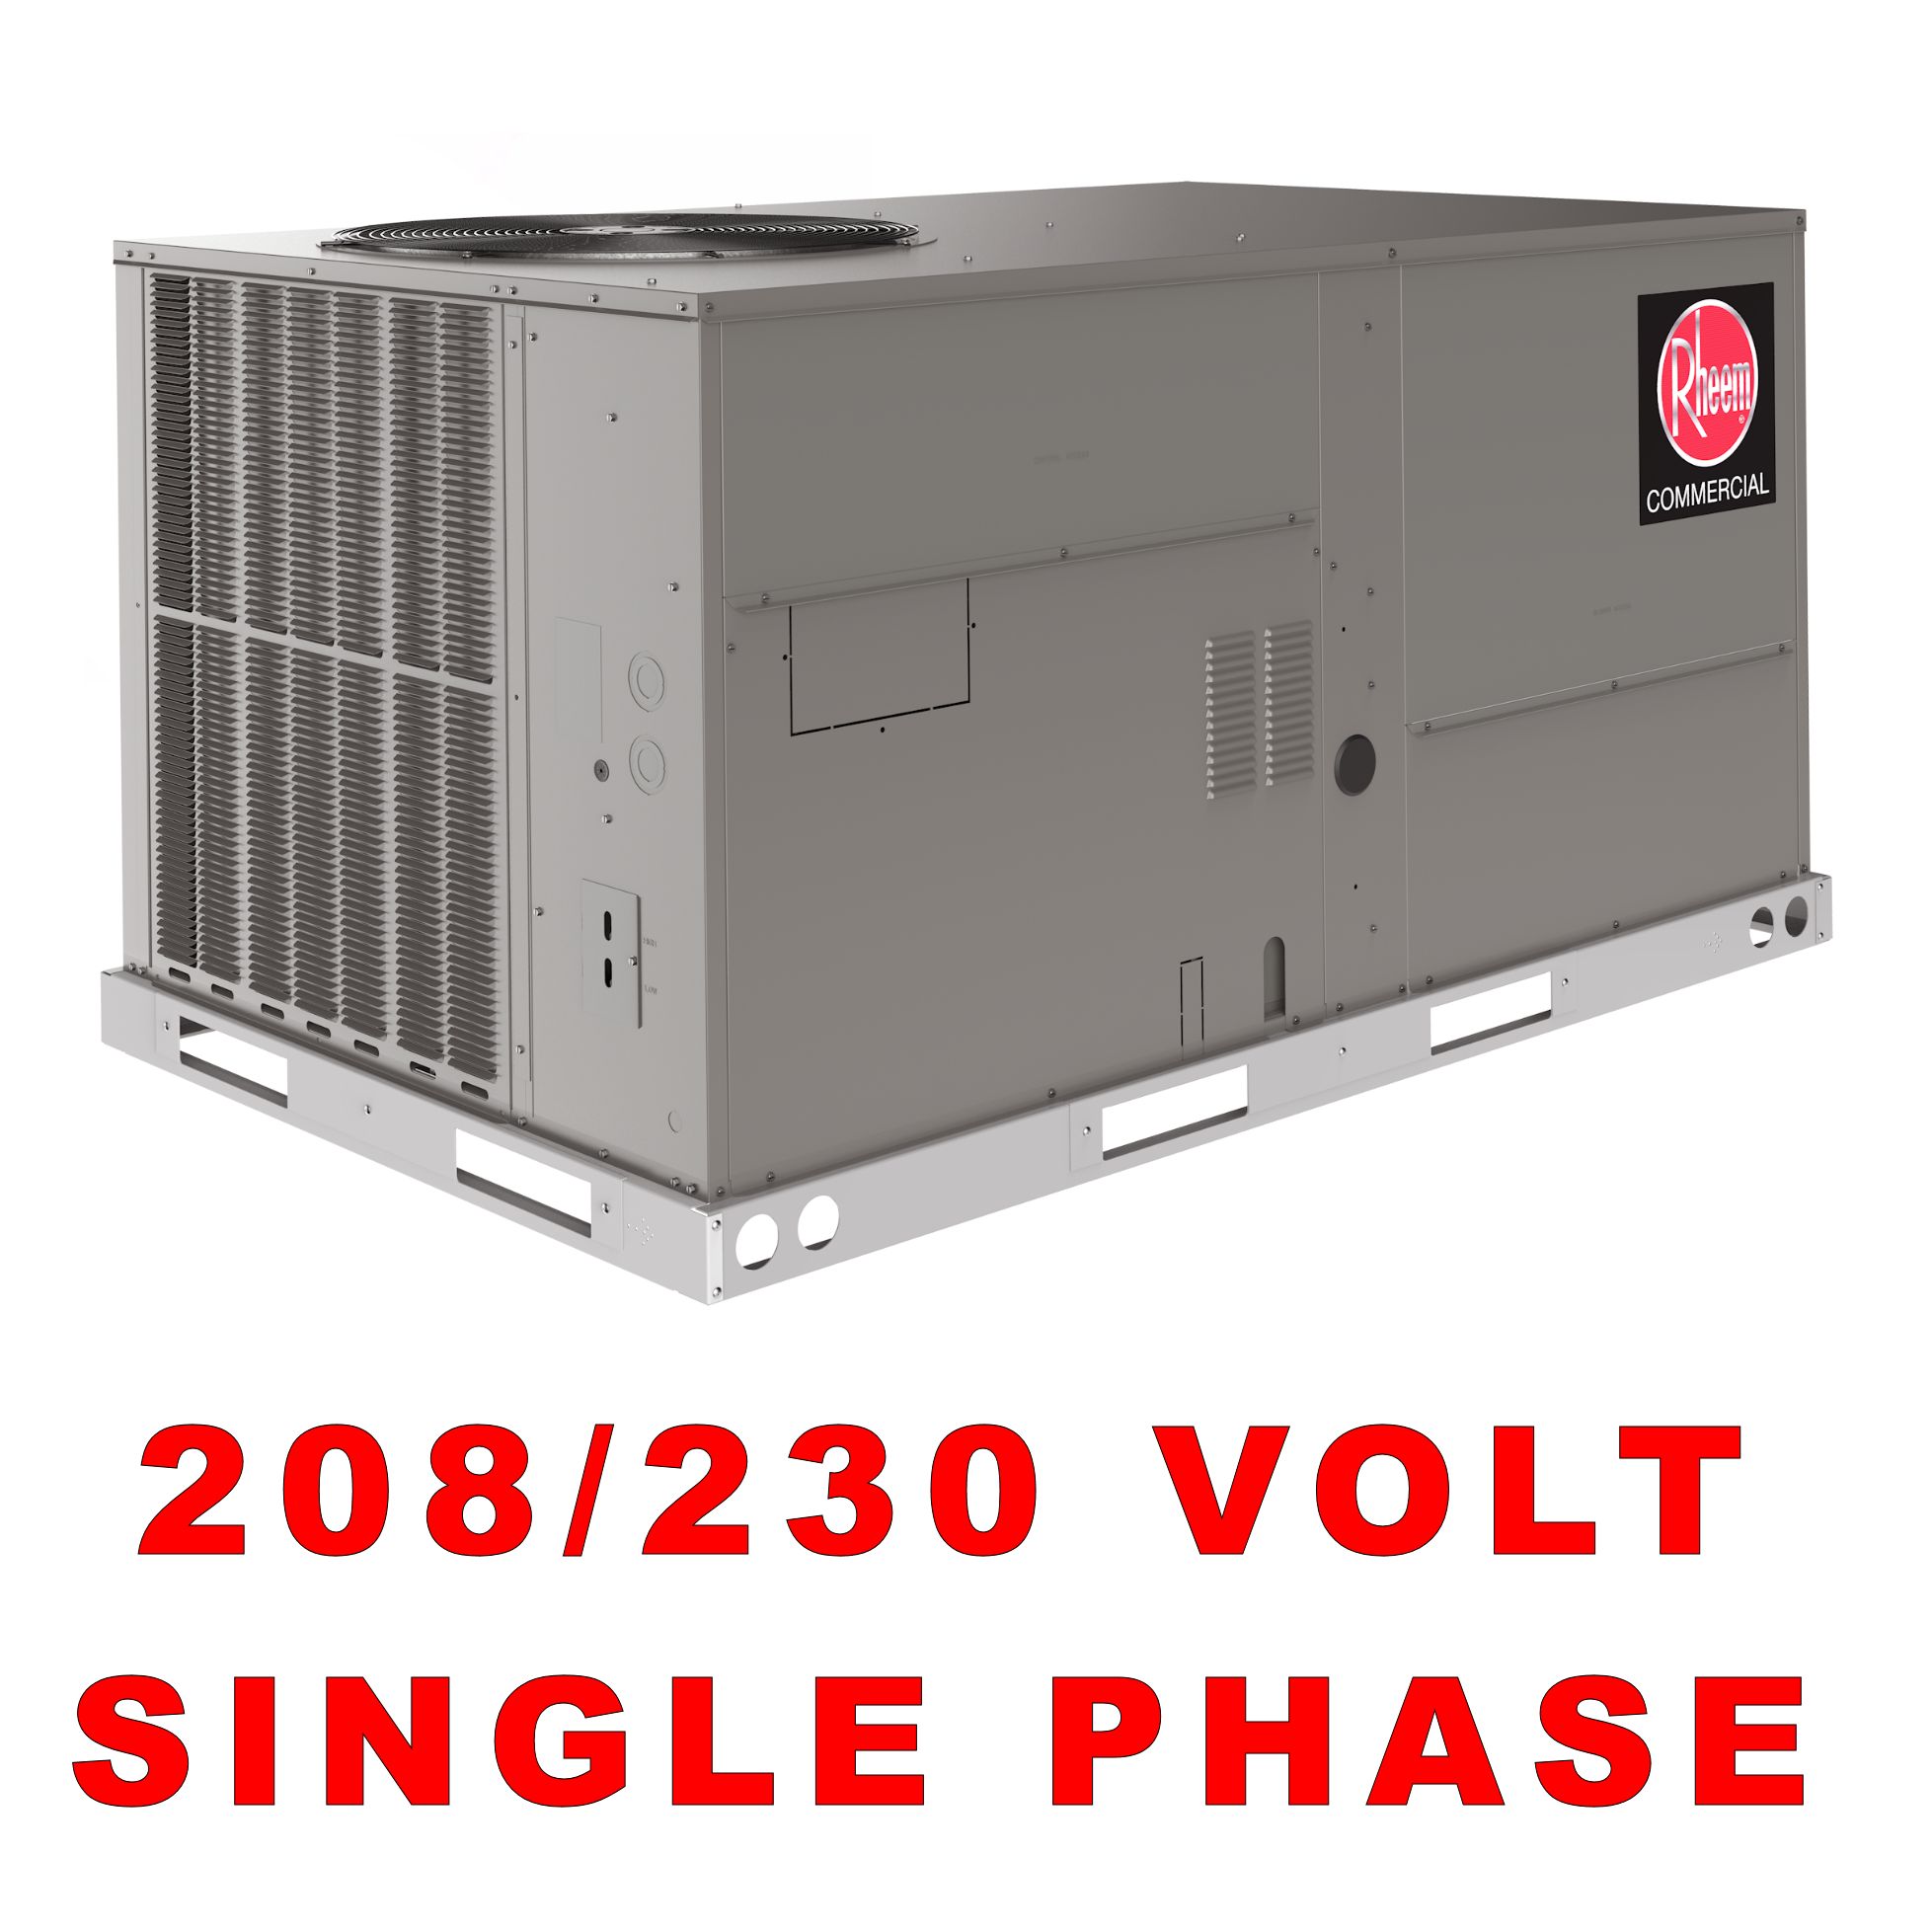 Rheem Commercial Package Units